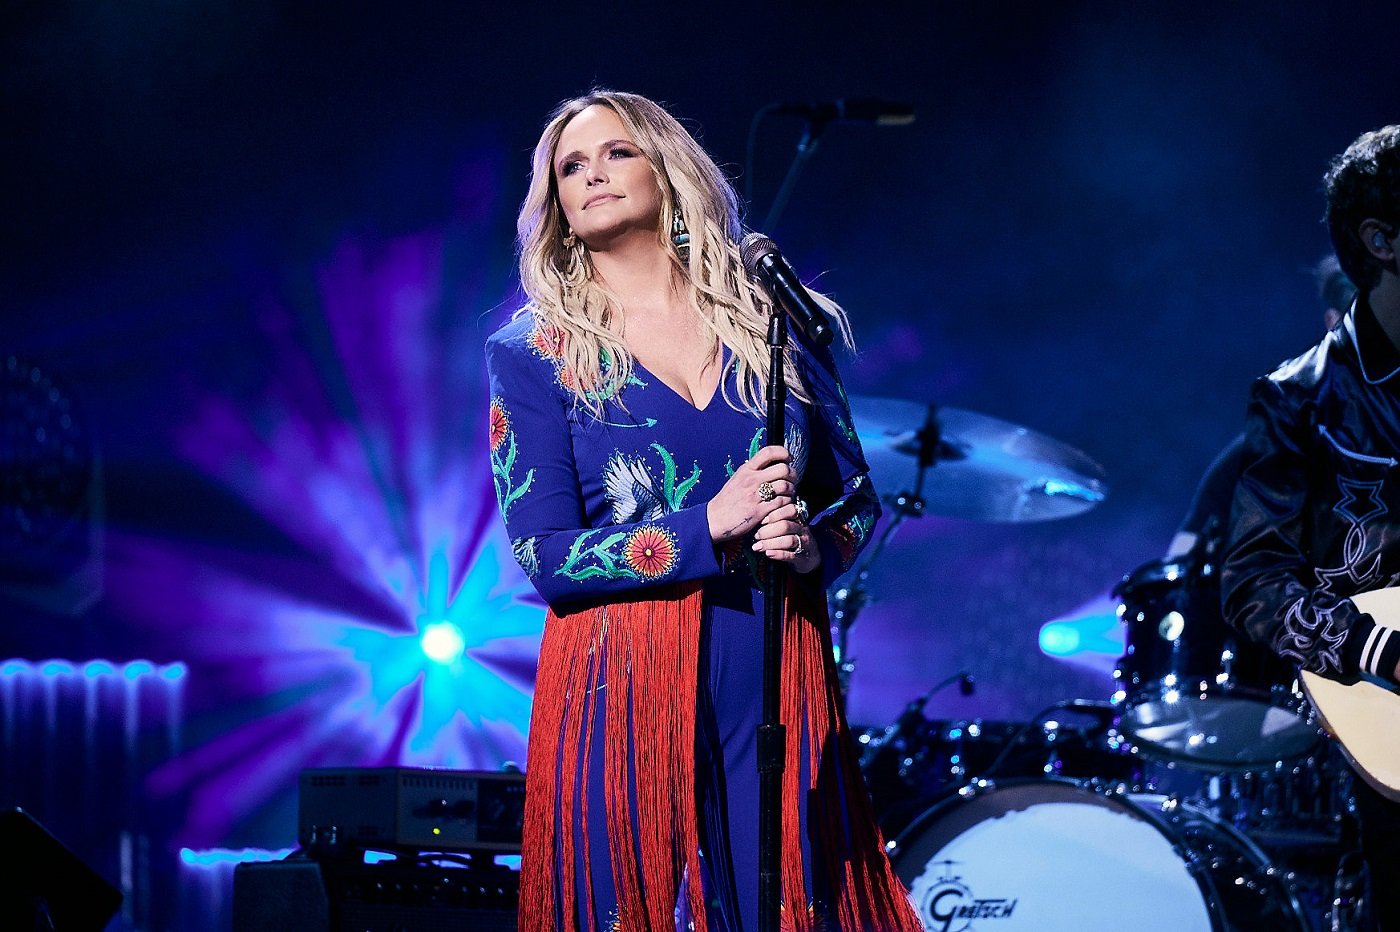 Miranda Lambert stands on stage in a blue-and-red outfit